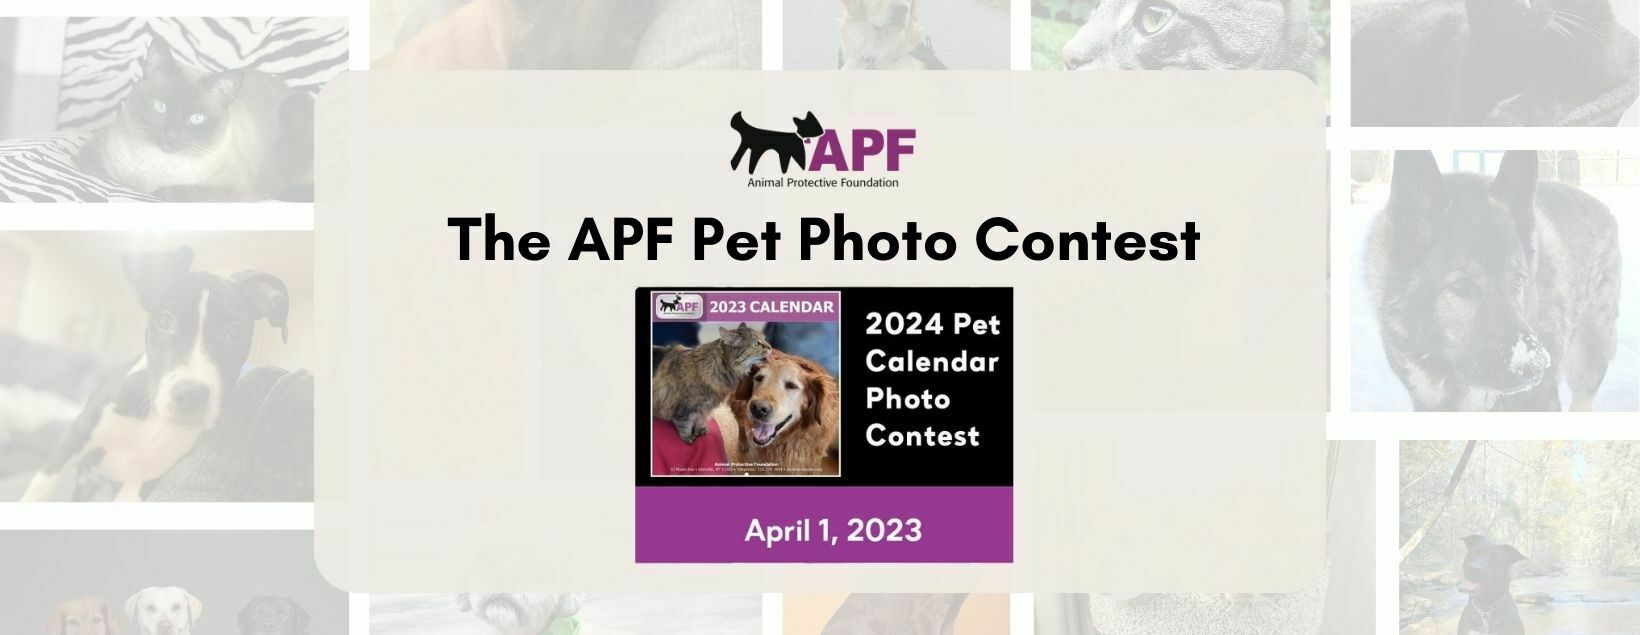 The Animal Protective Foundation Pet Photo Contest